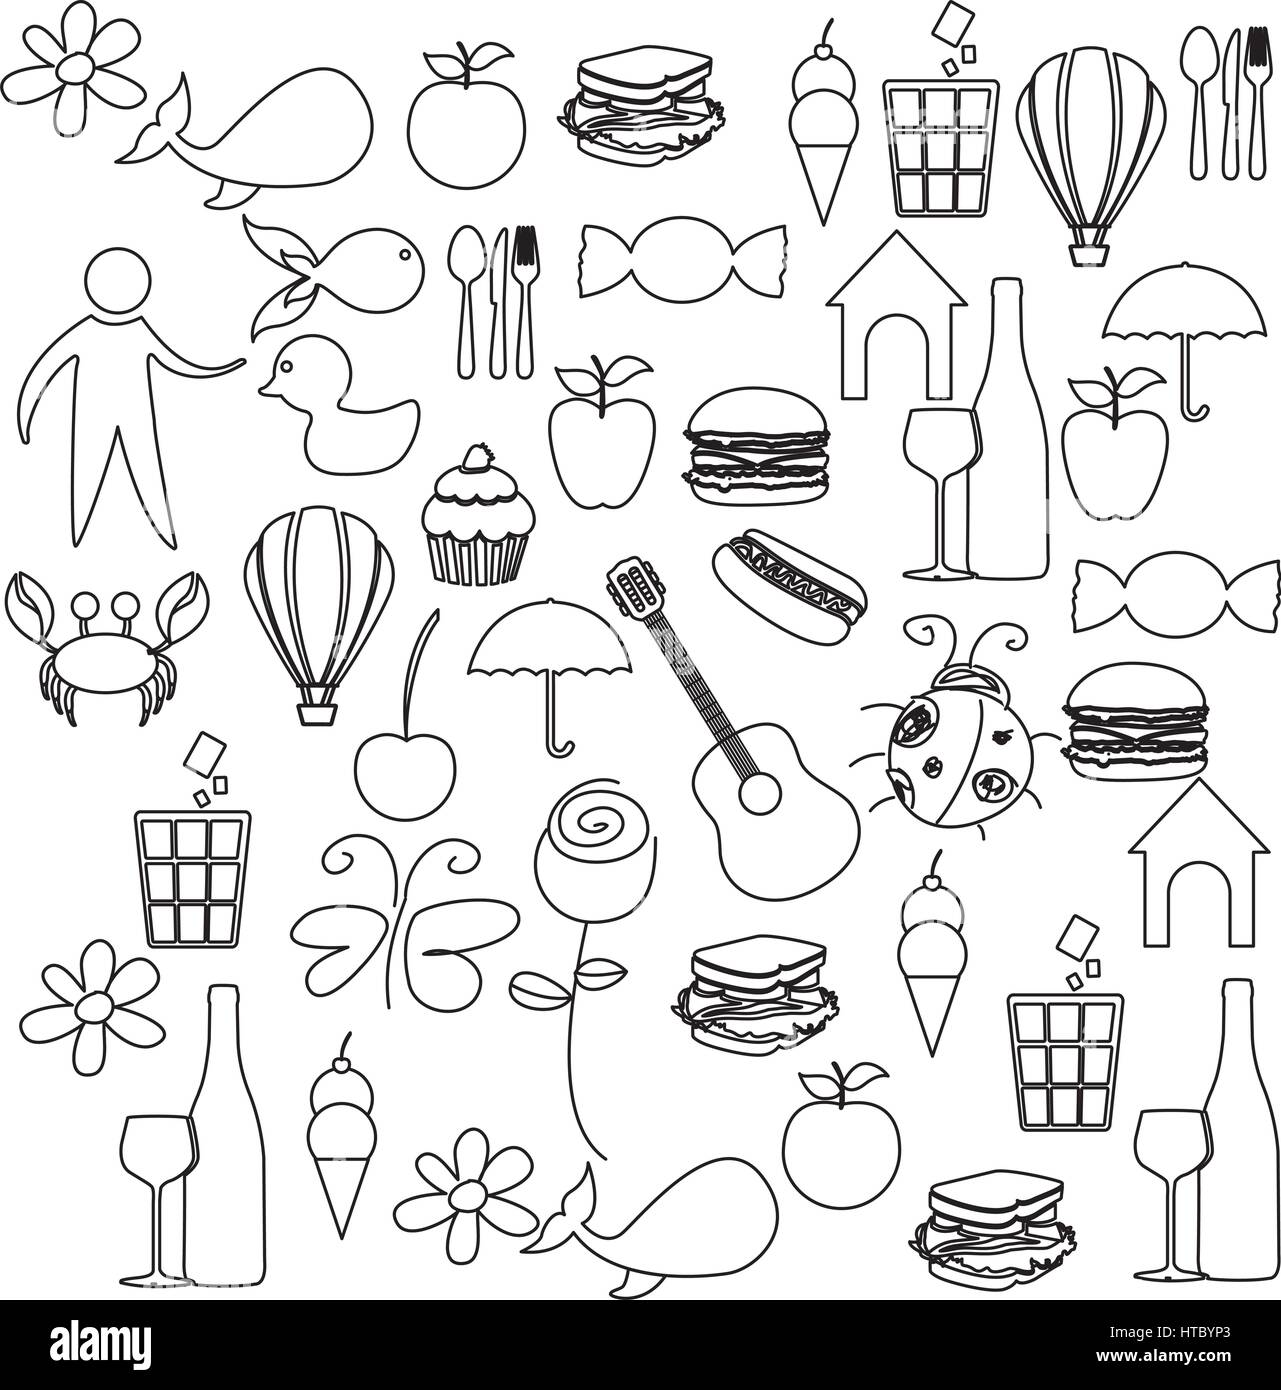 sketch contour set elements daily life icon vector illustration Stock Vector